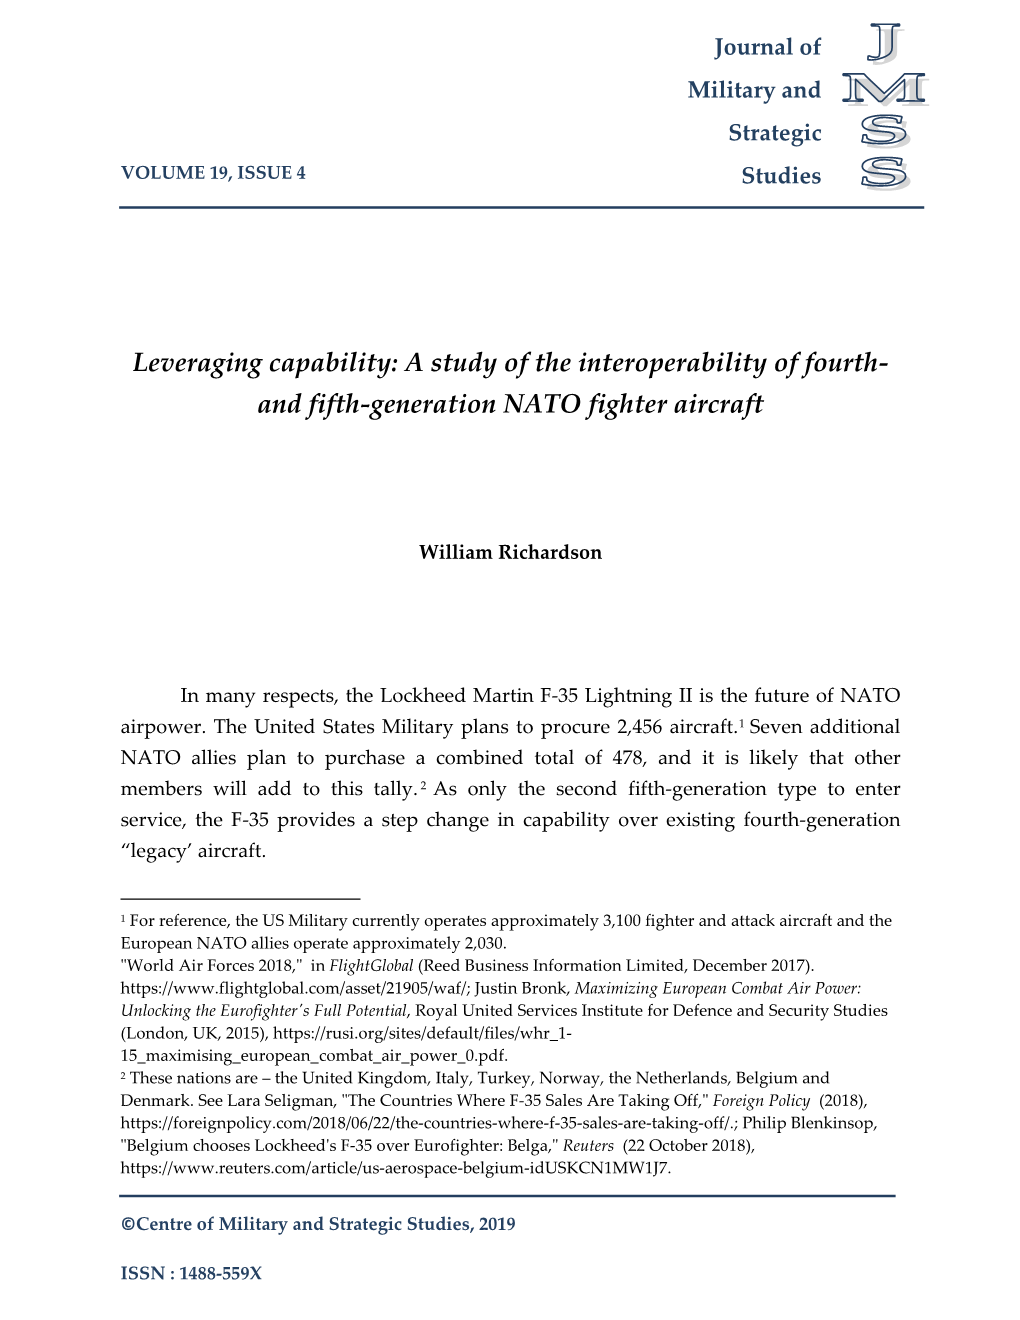 Leveraging Capability: a Study of the Interoperability of Fourth- and Fifth-Generation NATO Fighter Aircraft